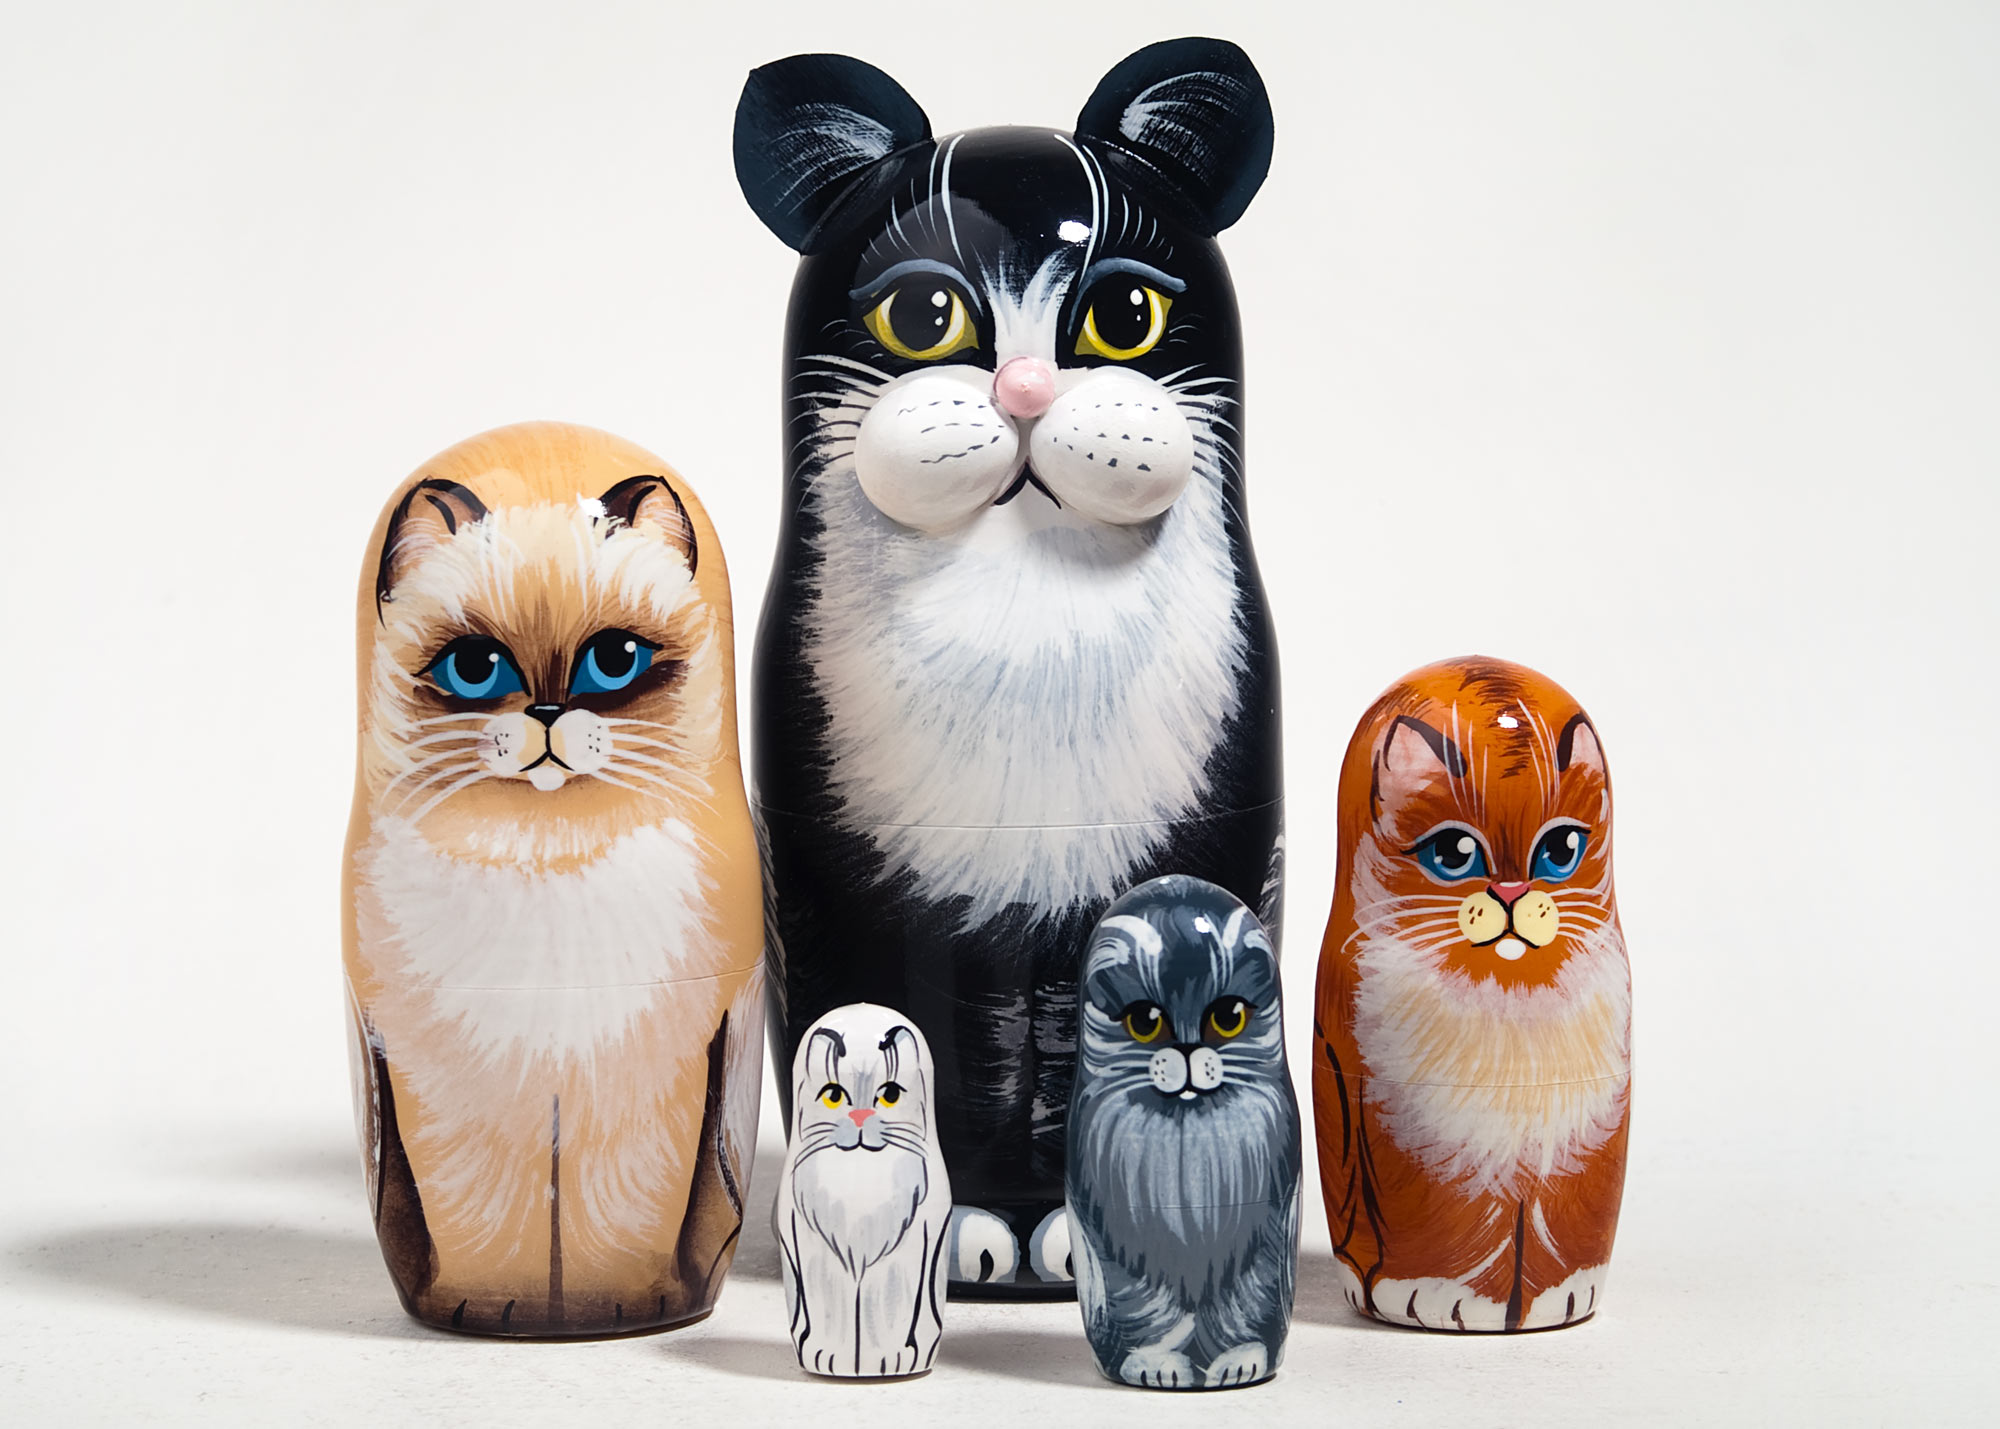 Cats Wooden Nesting Animal Pet Doll Russian Handmade Stacking Dolls Gifts 5pc Q 